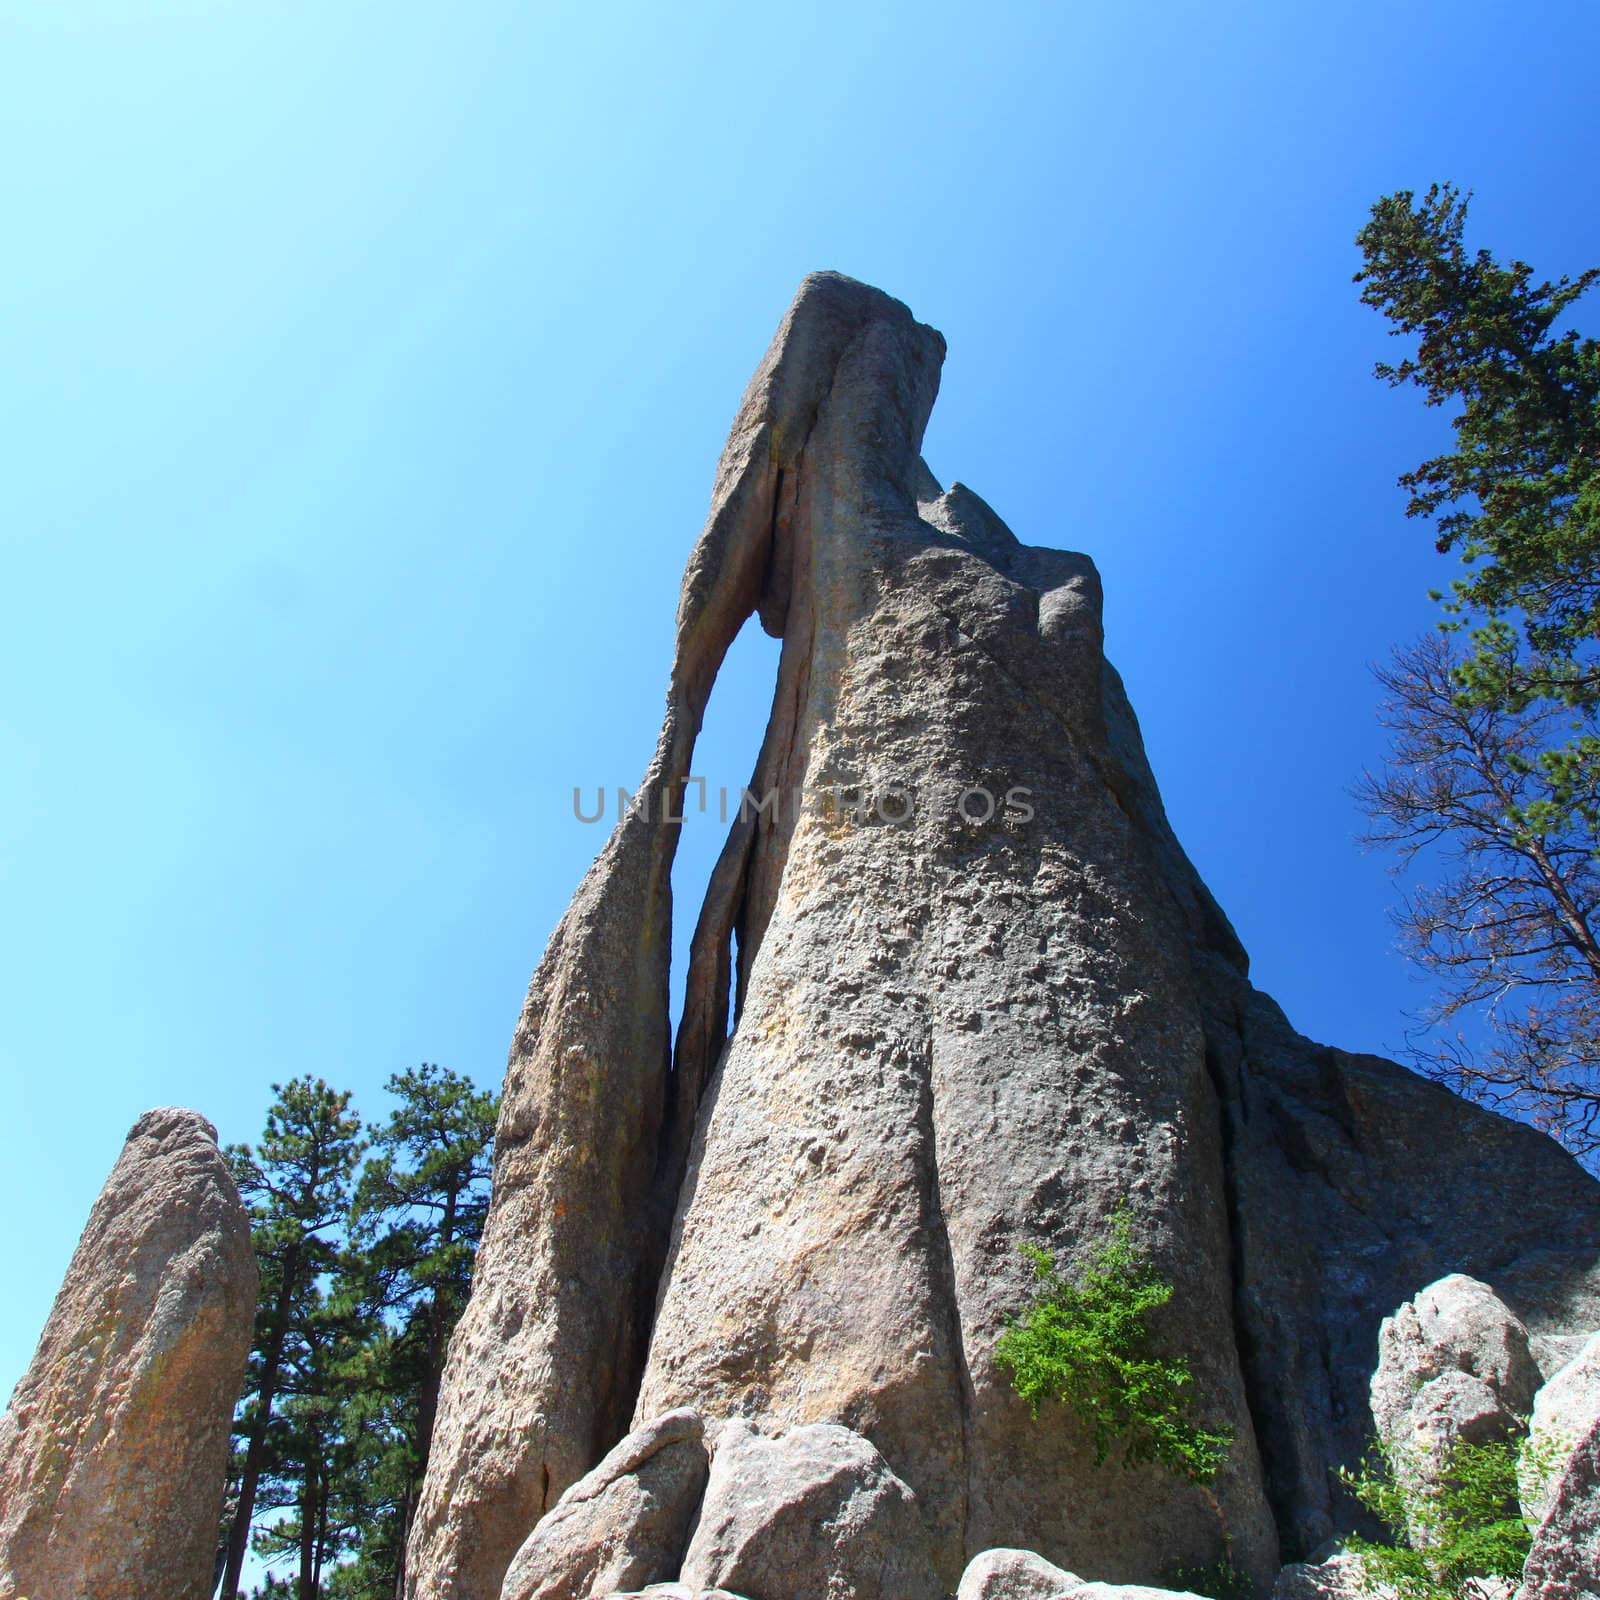 View of the Needles Eye in Custer State Park of South Dakota.